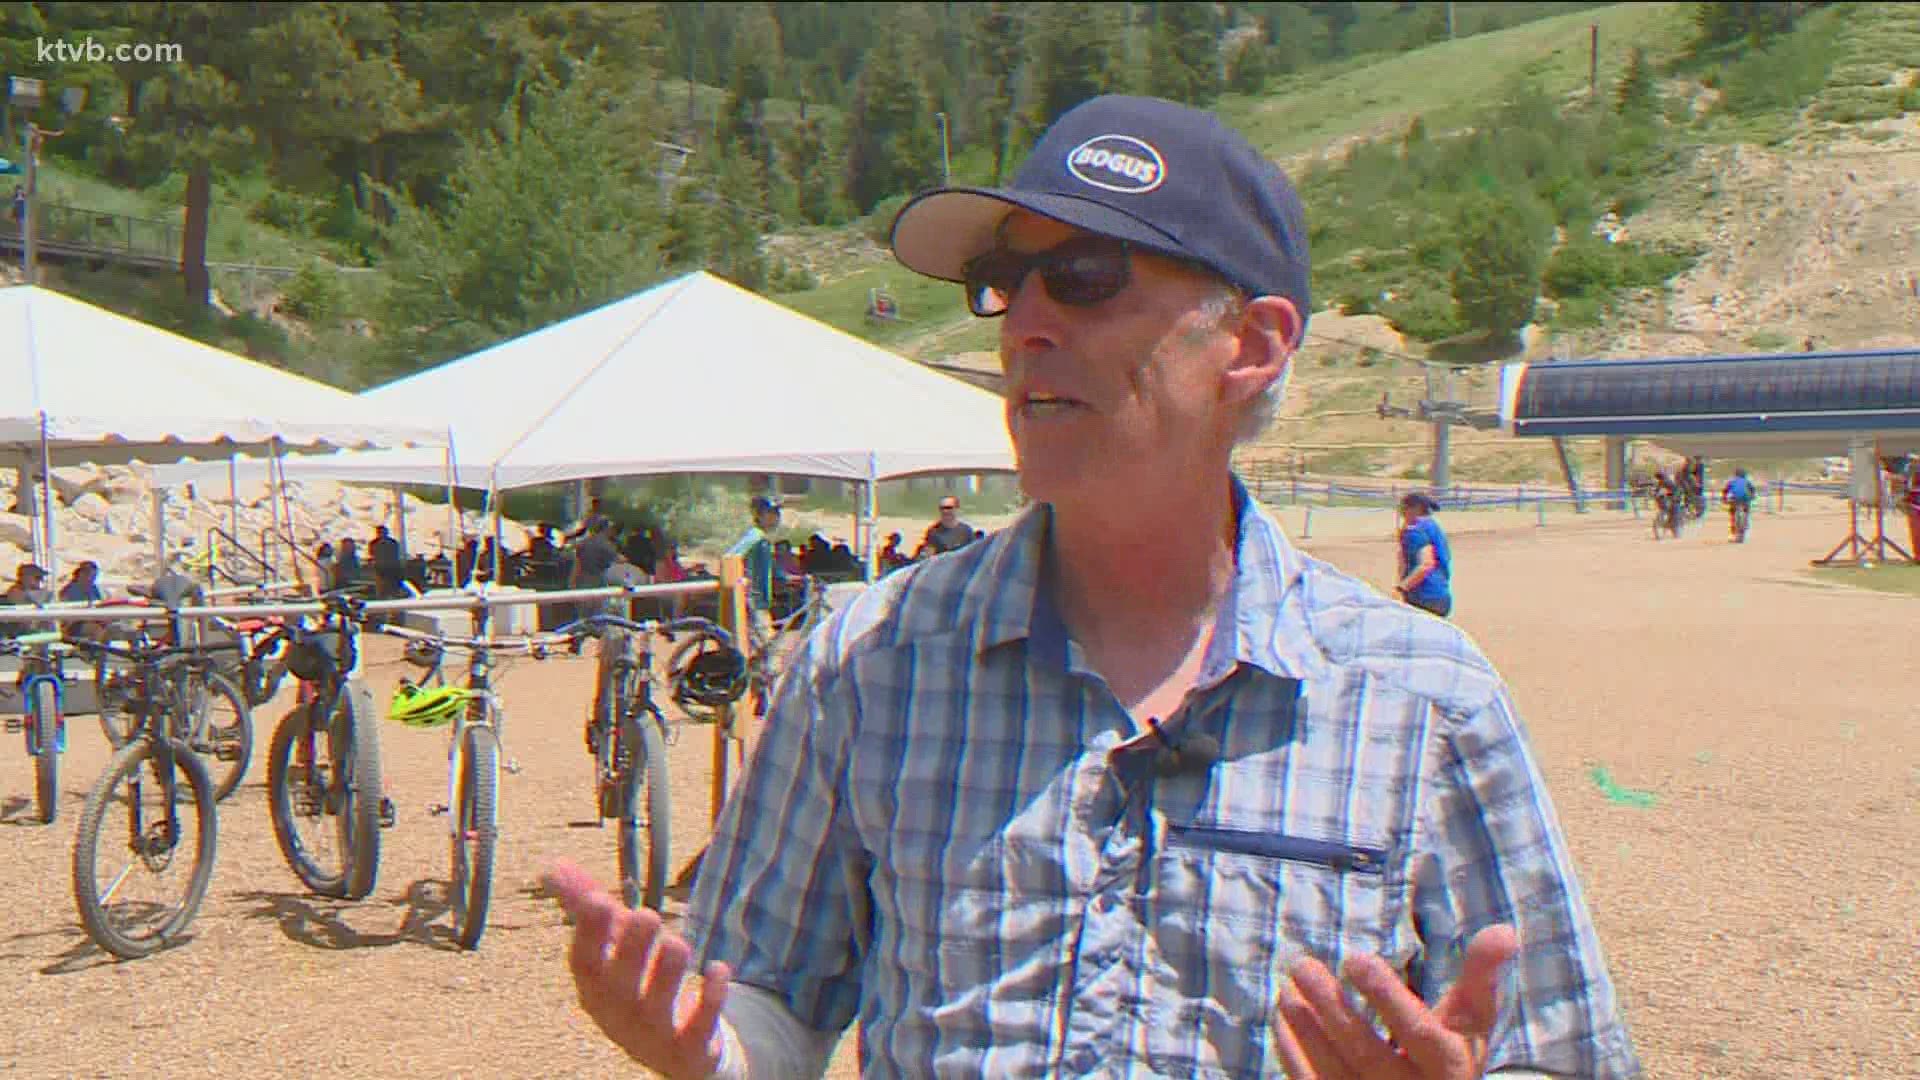 Along with its current attractions, Bogus Basin has more than 70 events planned for this summer.